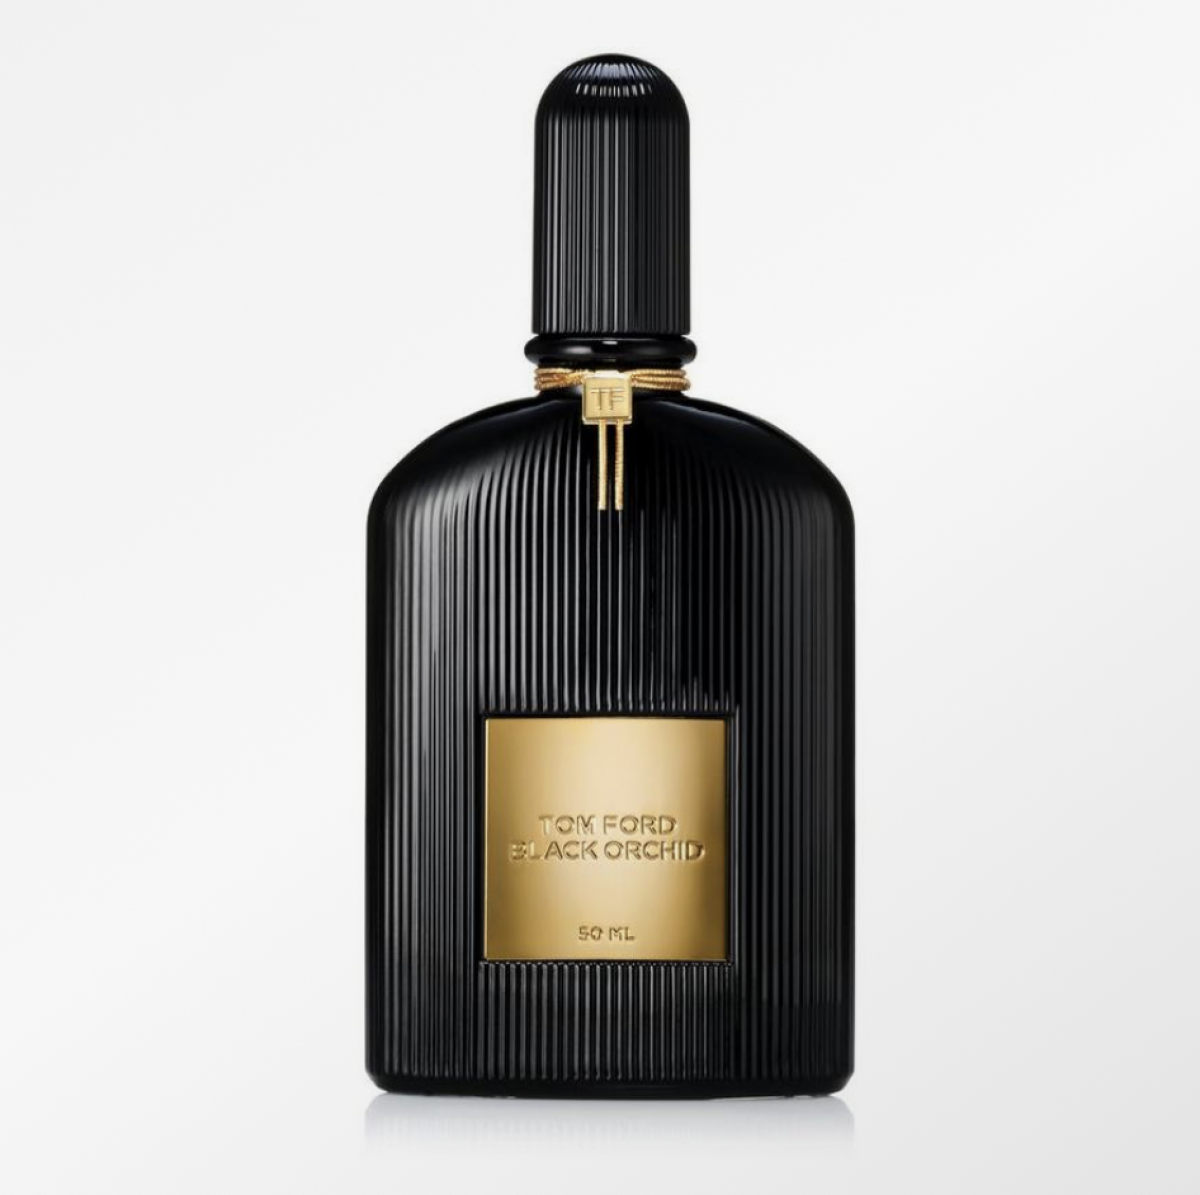 Tom Ford, Black Orchid 